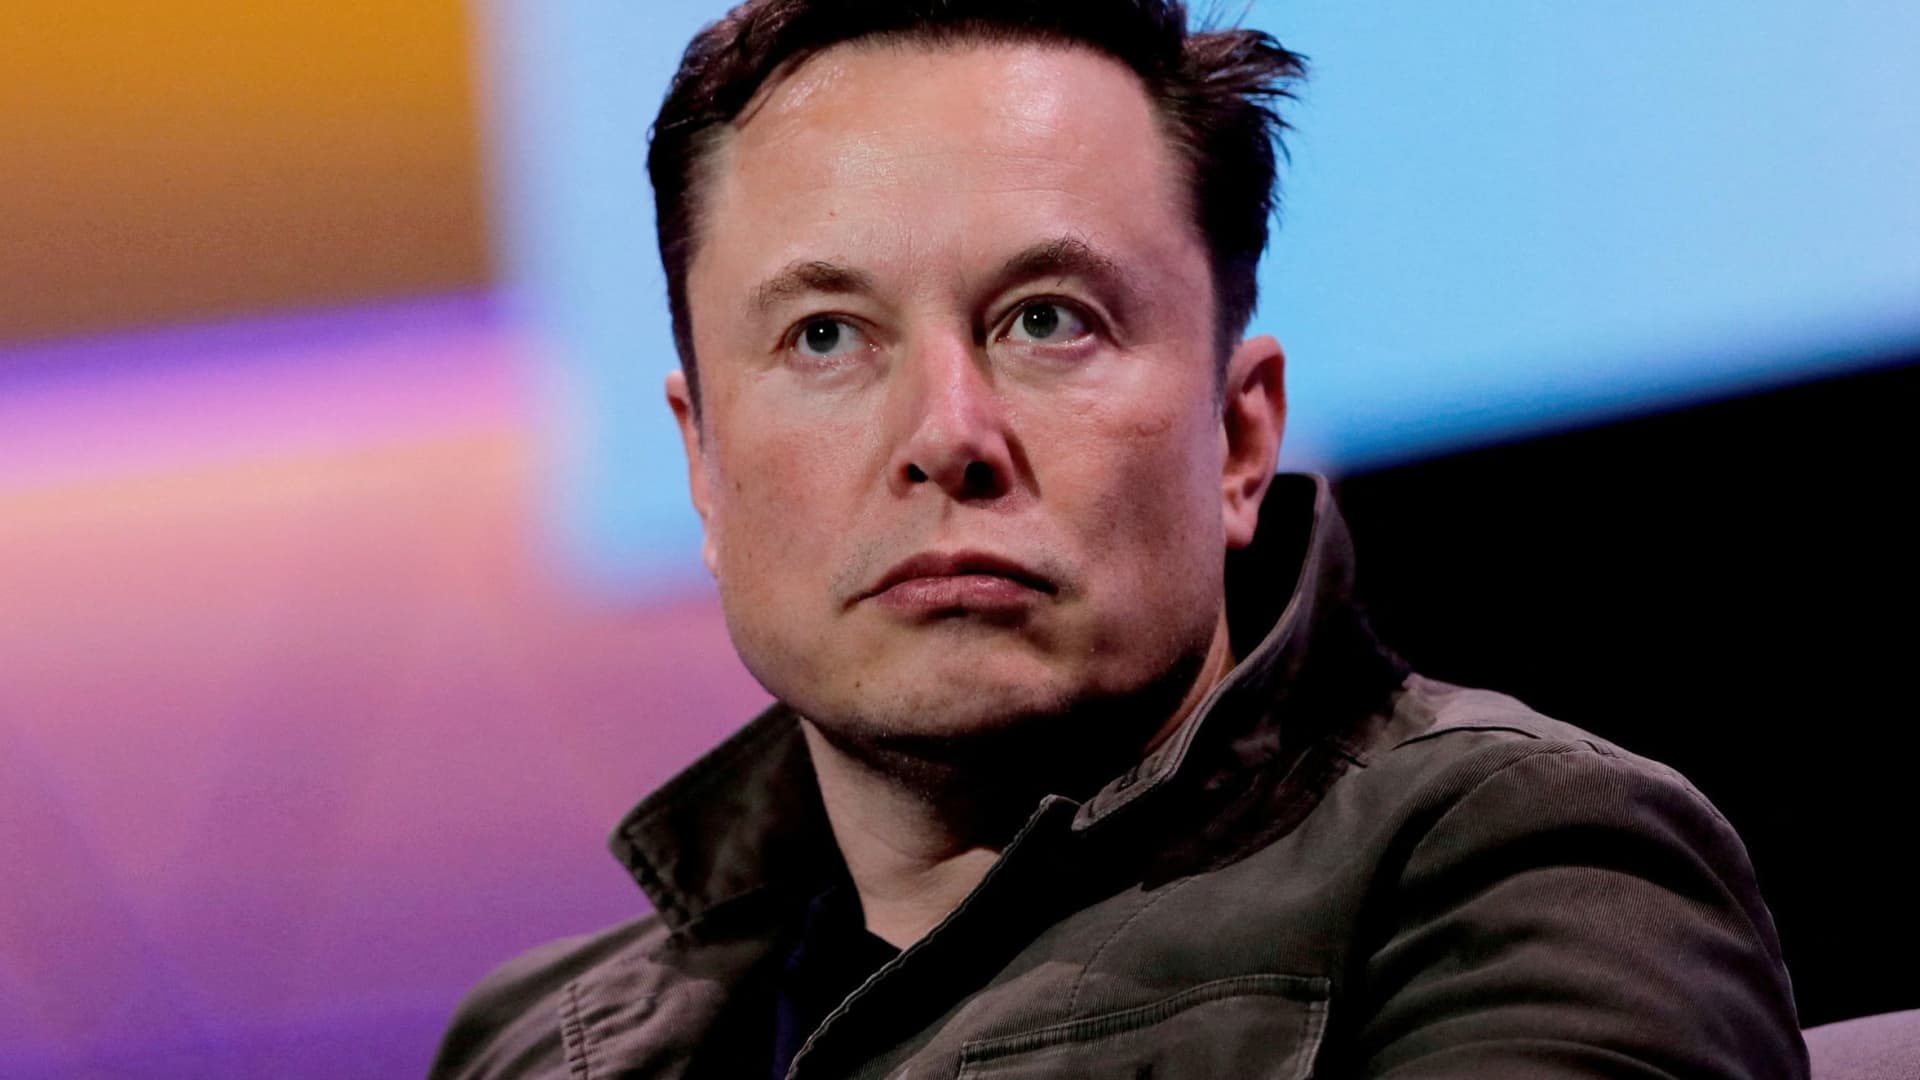 Elon Musk tells Tesla employees ‘don’t be bothered by stock market craziness’